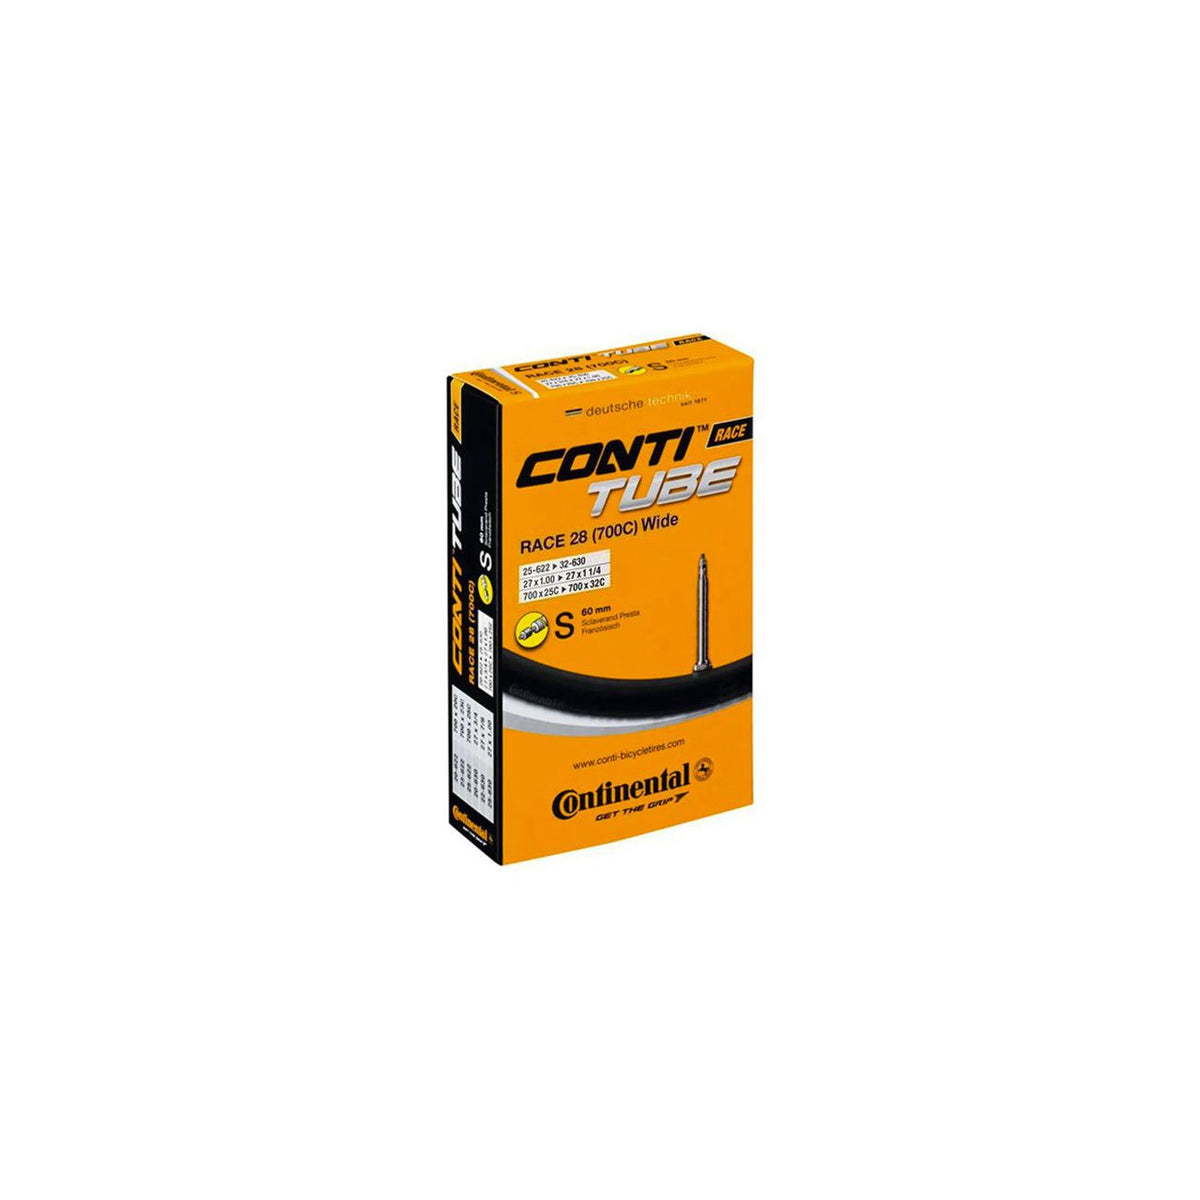 Continental Conti-Tube Race 28 700c X 25-32 Wide 60mm